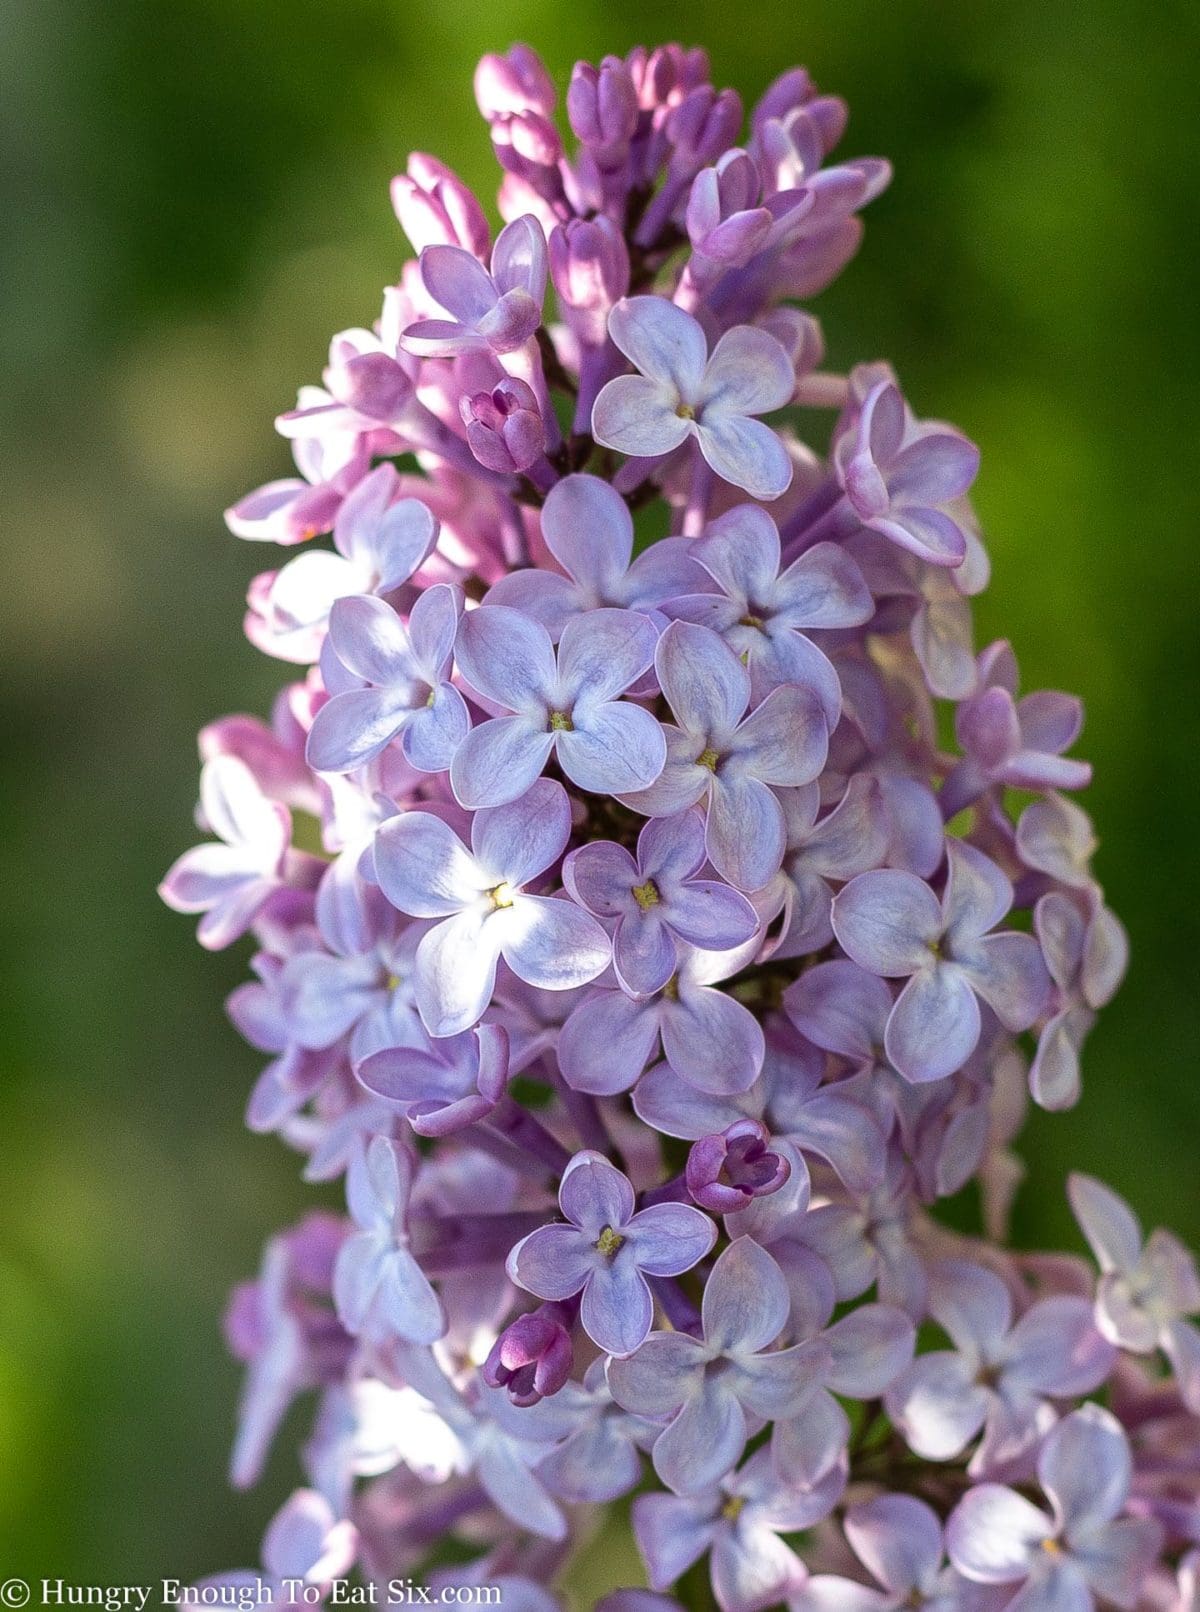 Cluster of light purple lilac blooms on the branch.